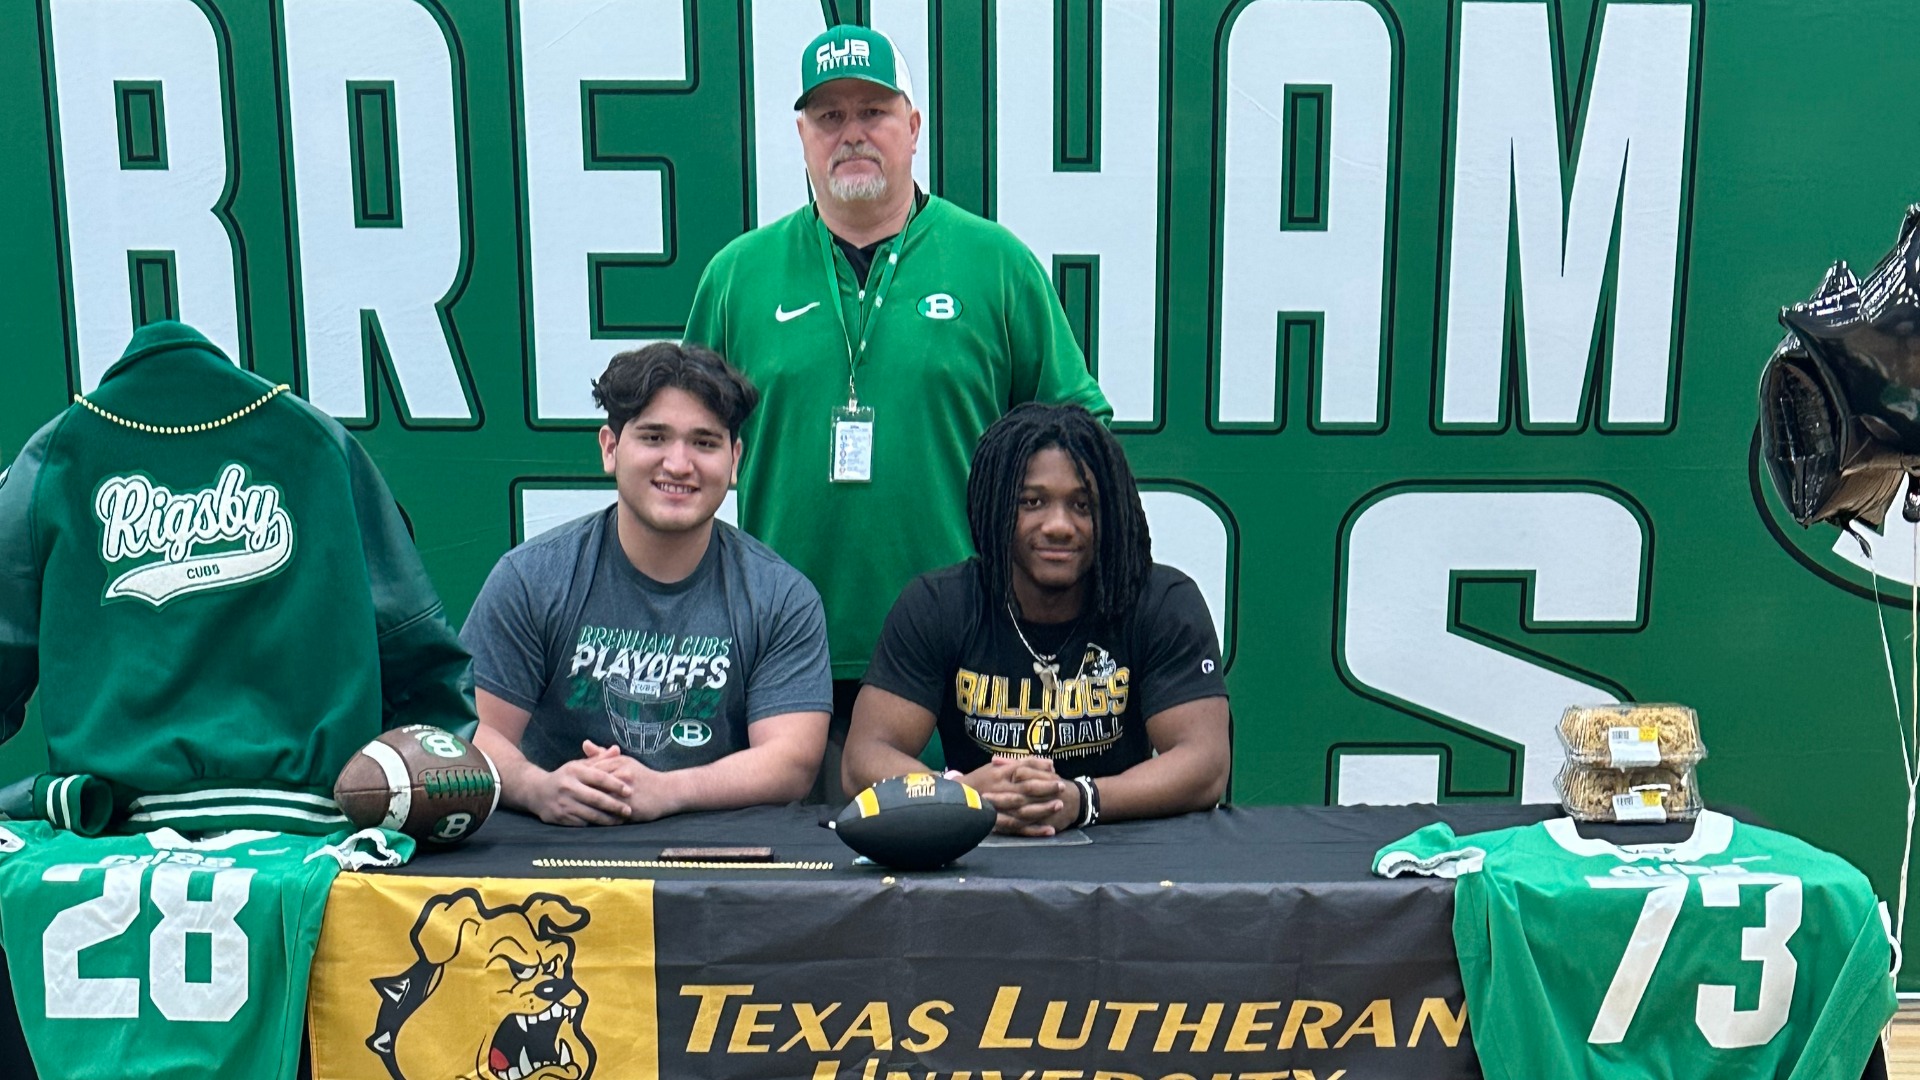 Slide 3 - Miguel Rodriguez, John Rigsby Sign with Texas Lutheran University